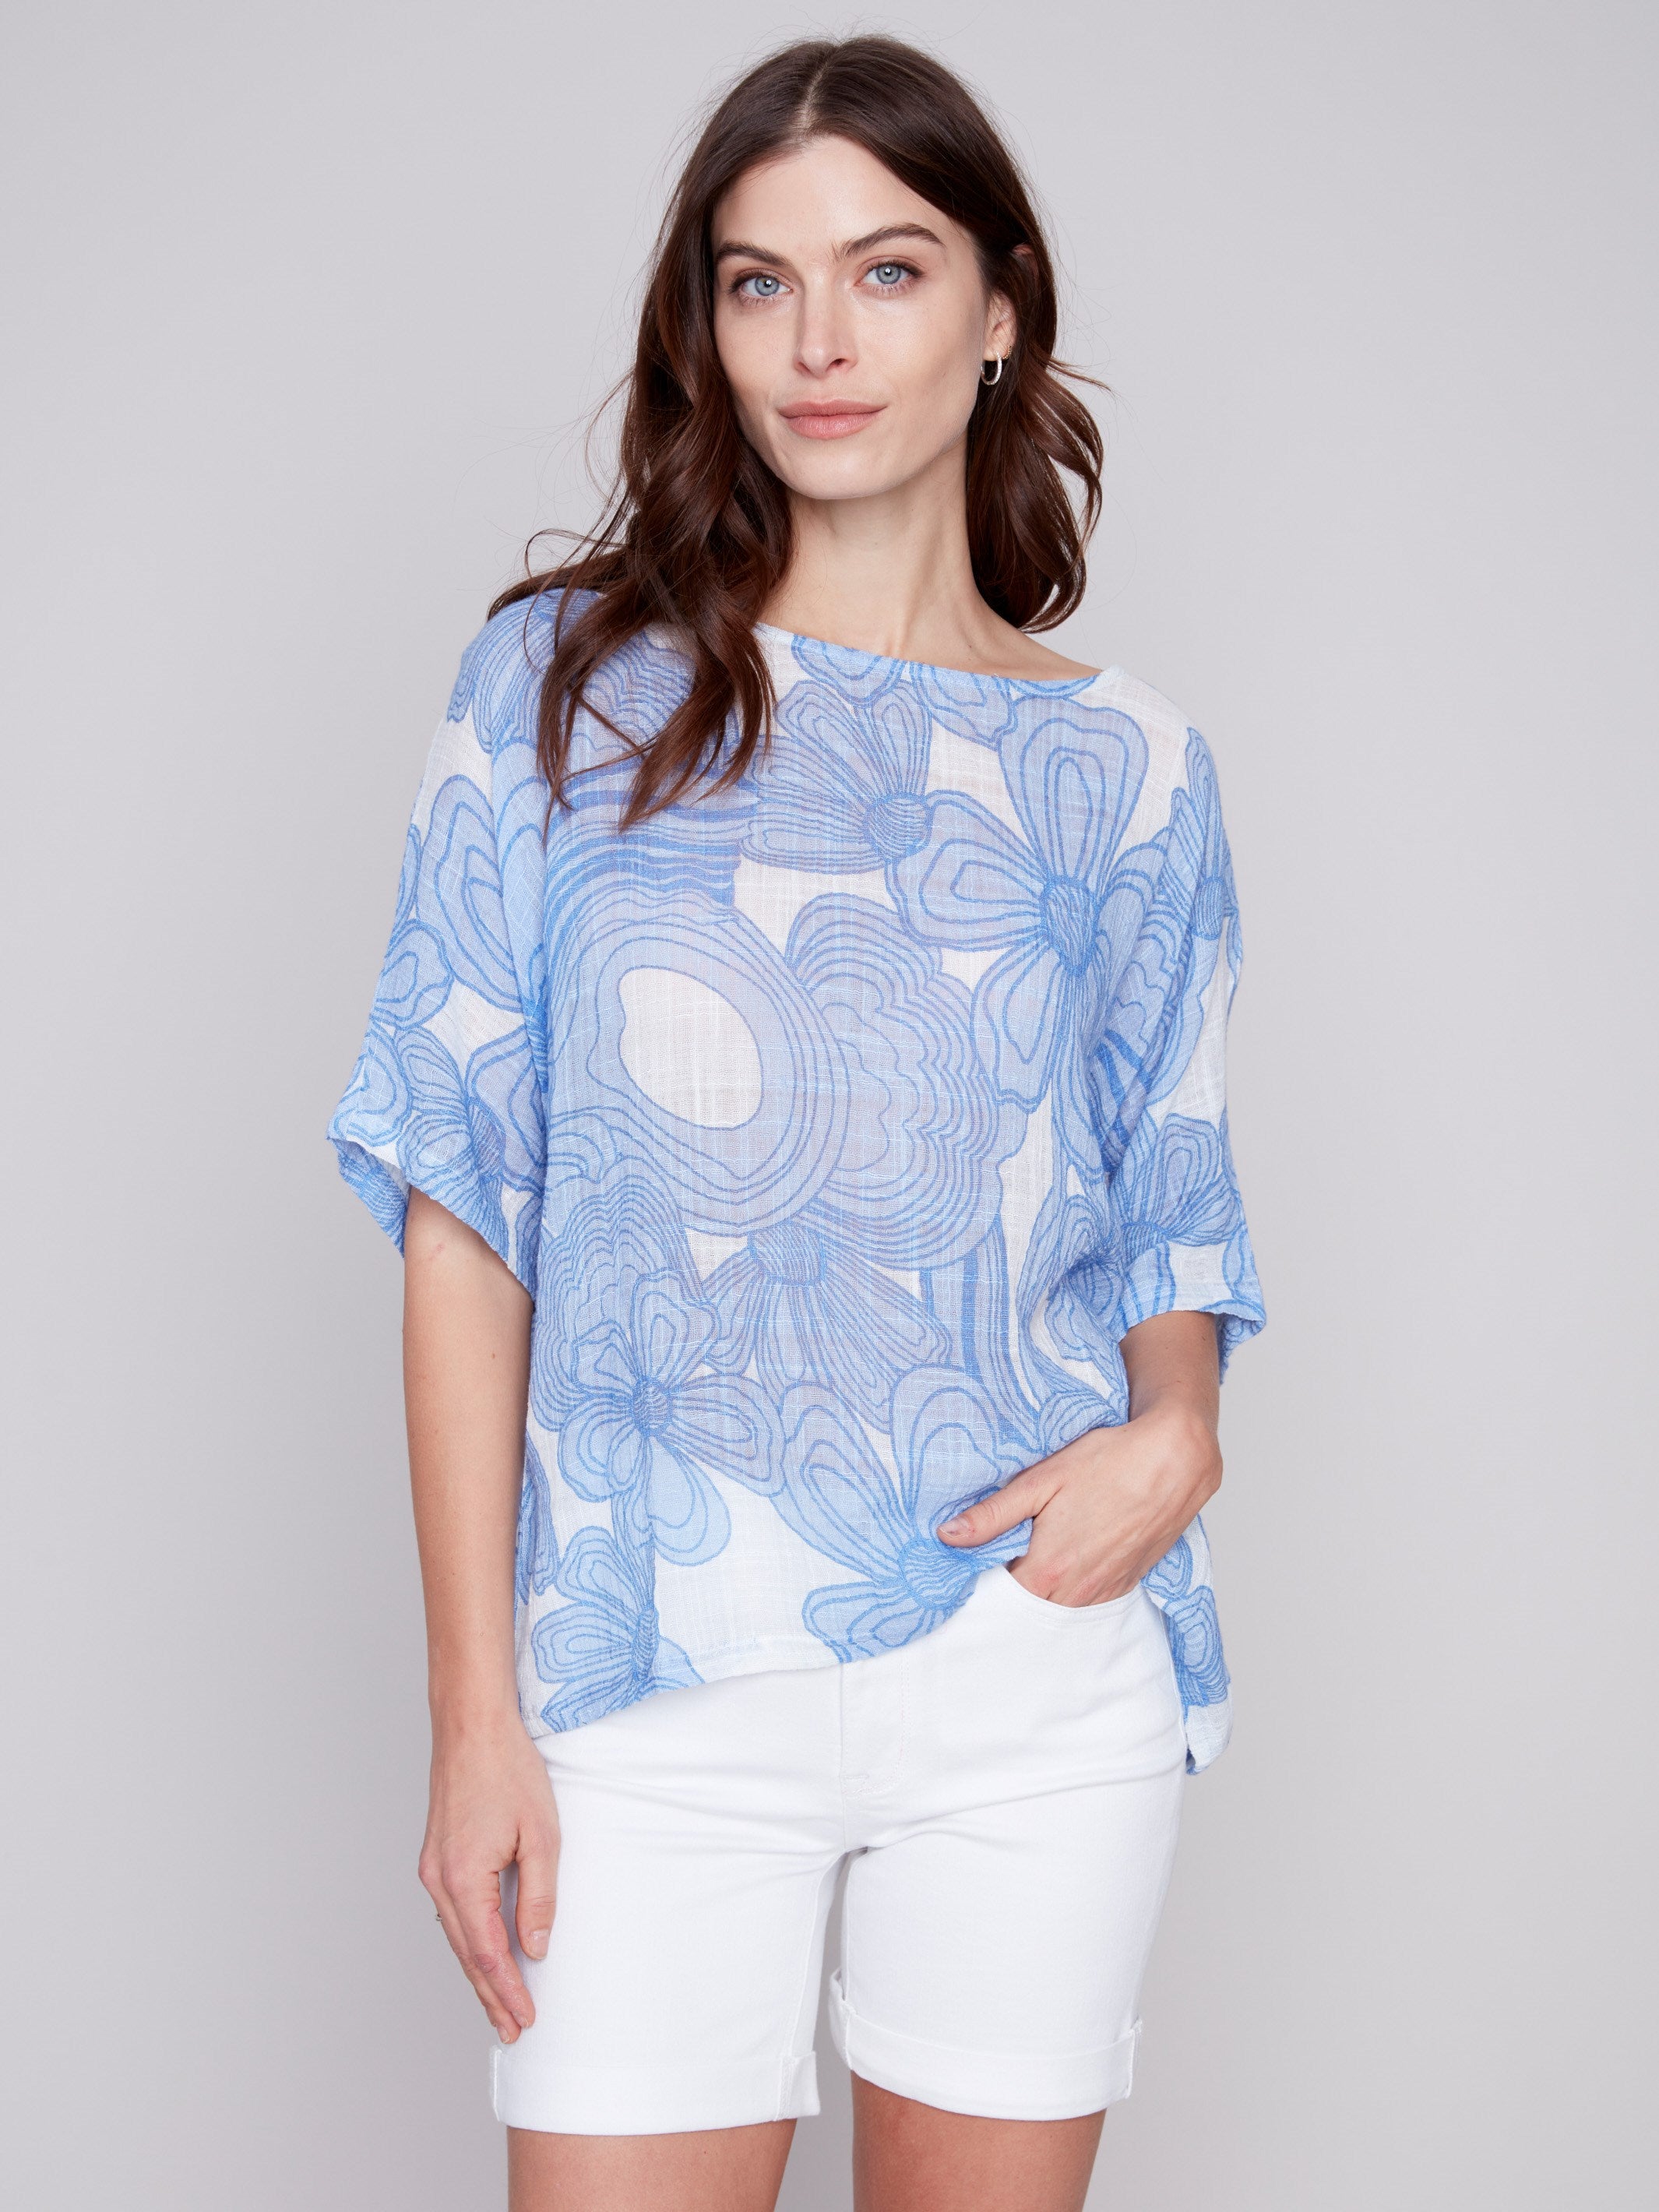 Printed Cotton Gauze Dolman Top - Blue - Charlie B Collection Canada - Image 1